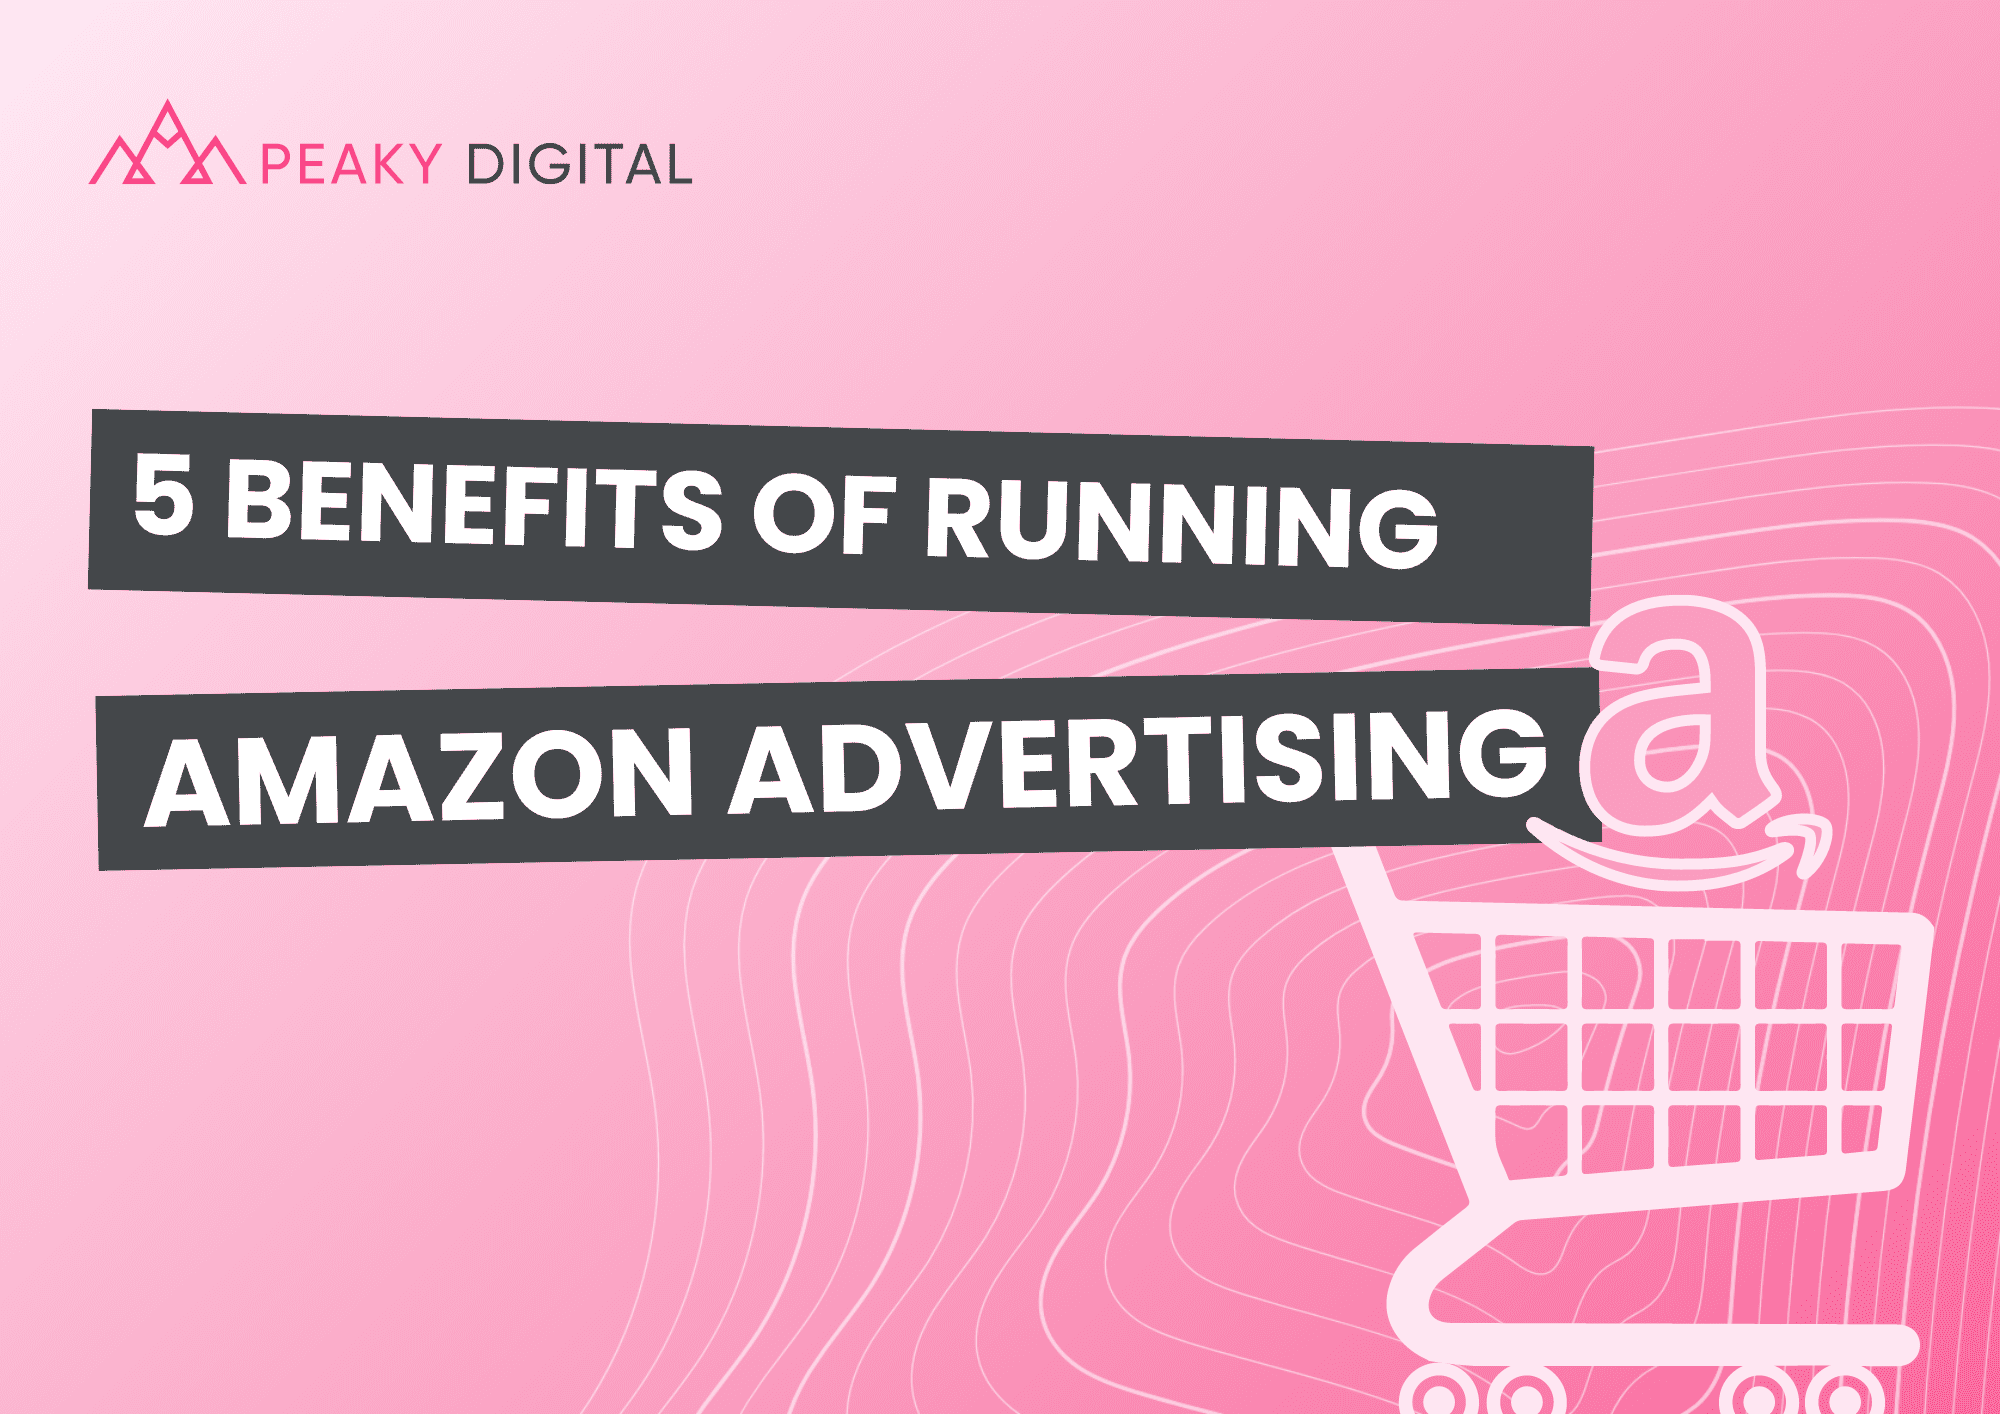 Pink Peaky Blog Banner for the 5 Benefits of Running Amazon Advertising